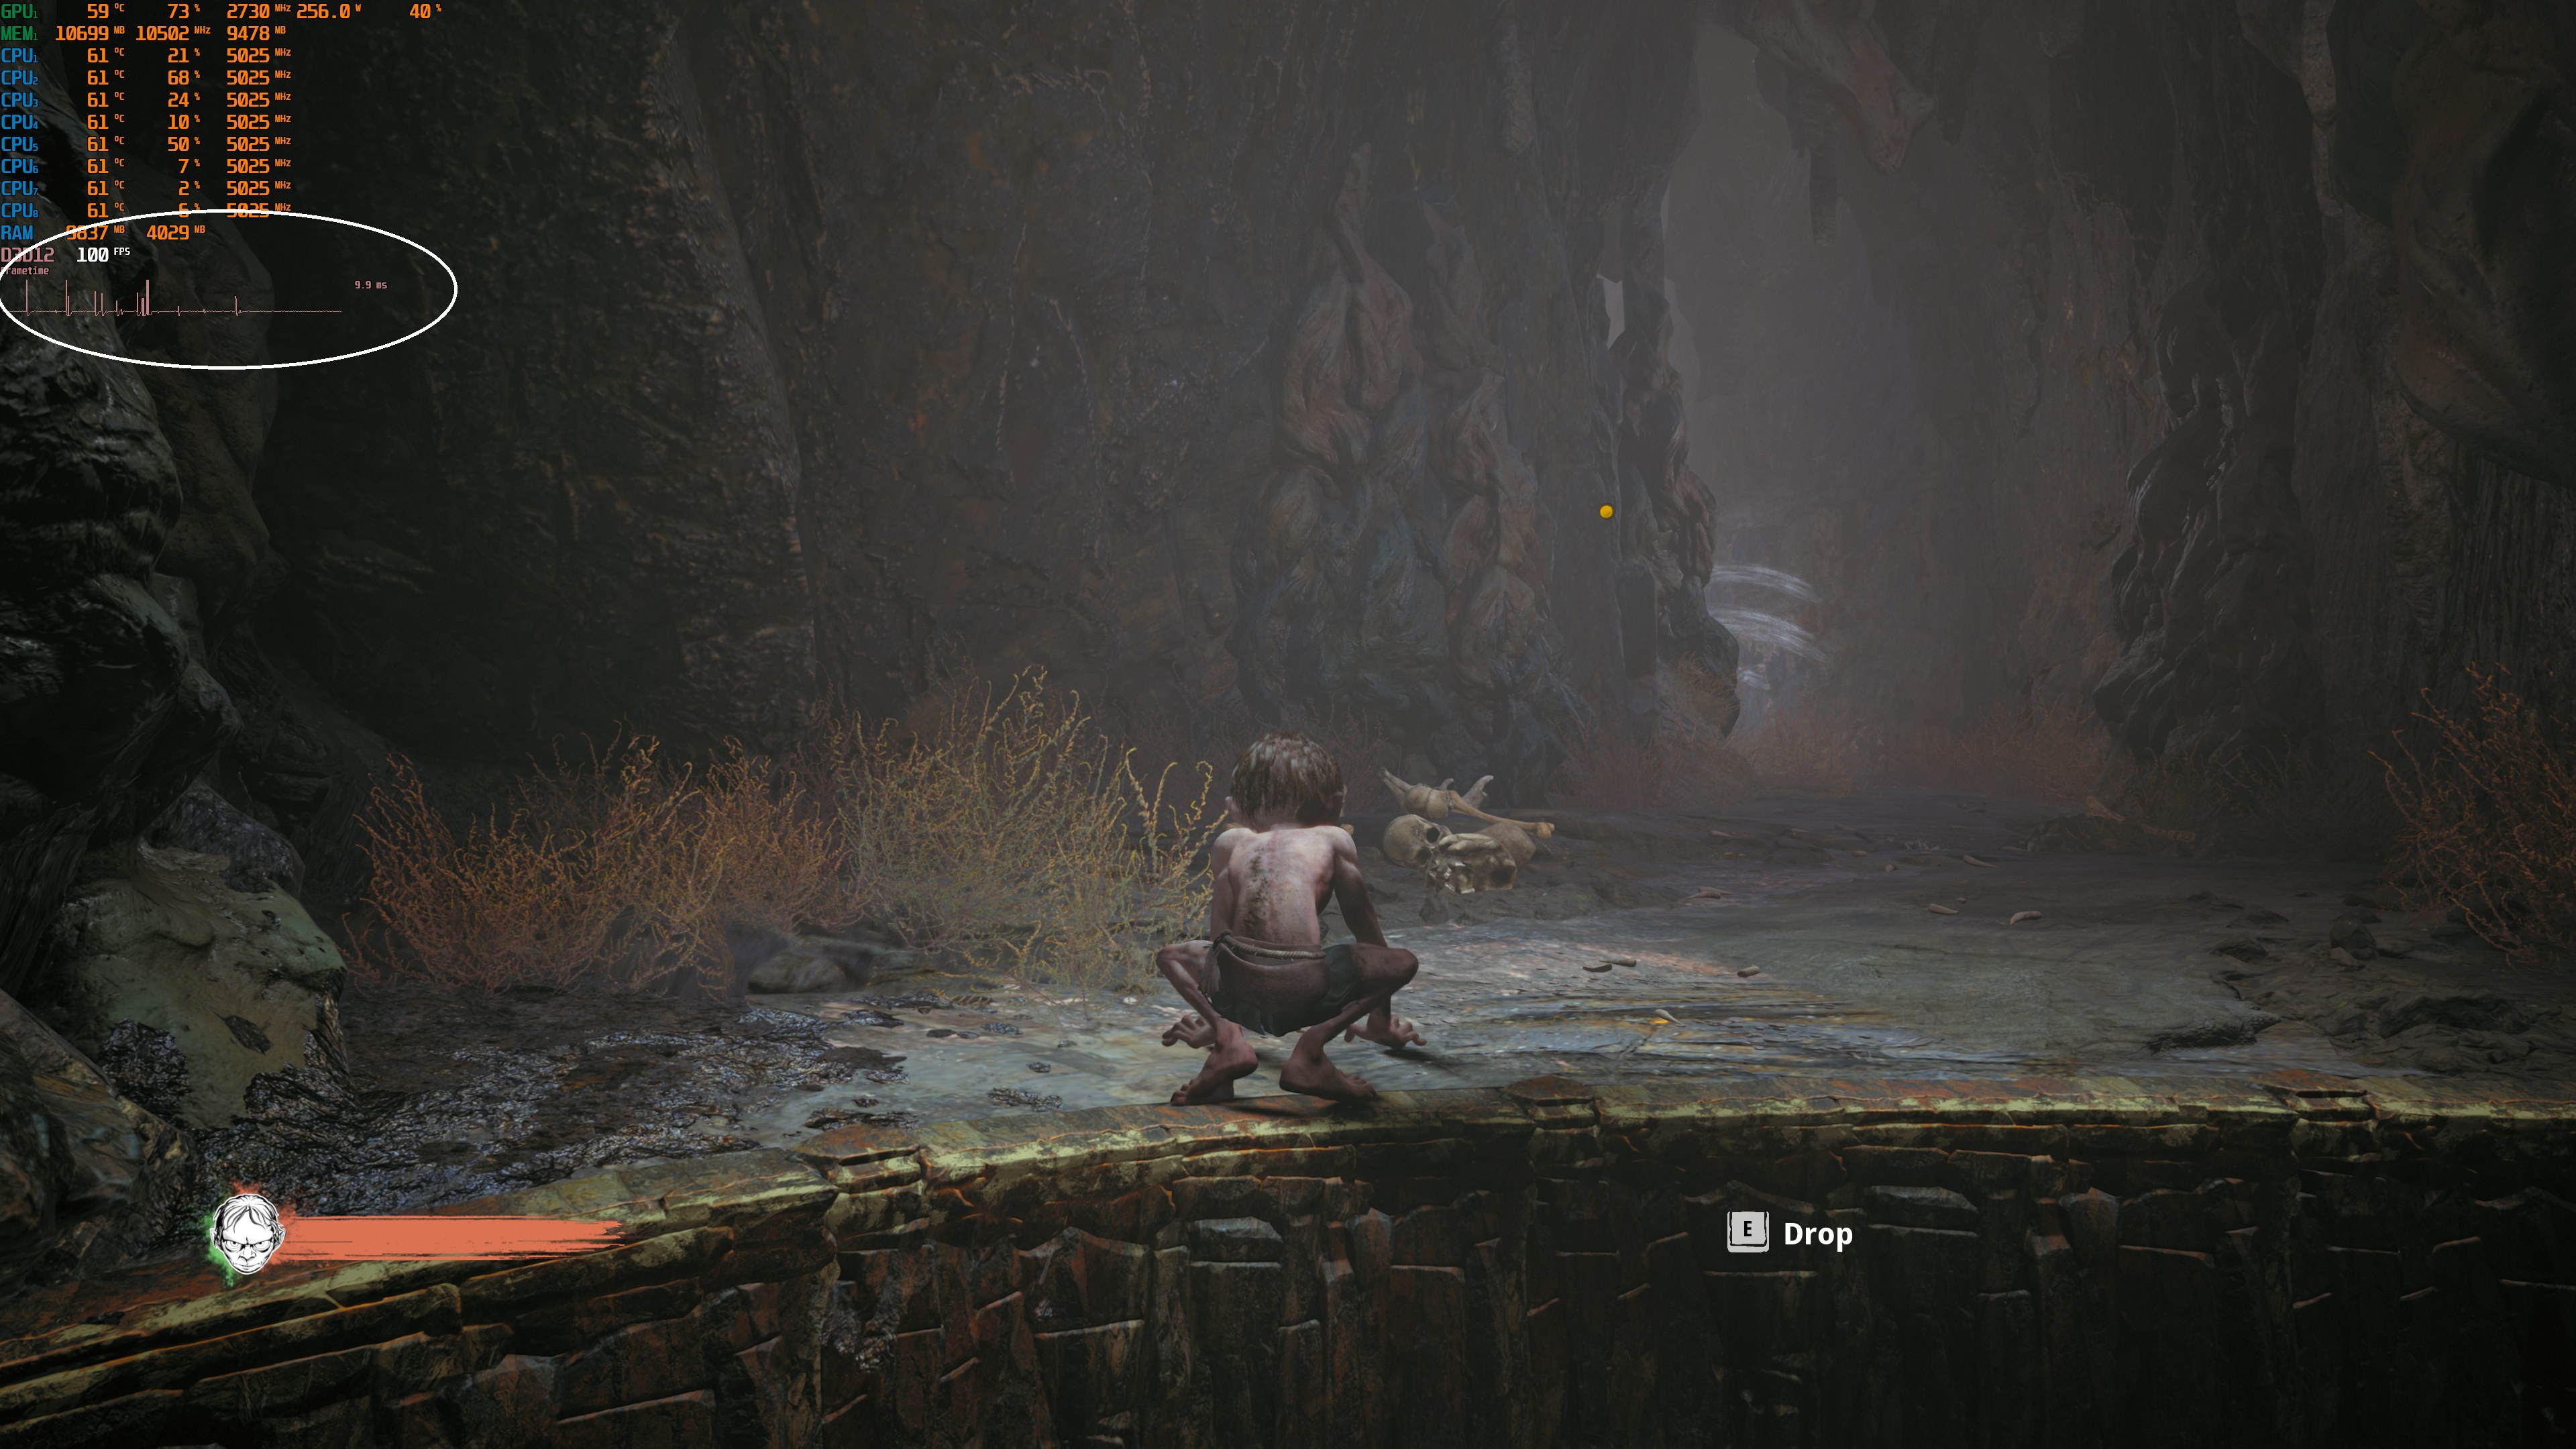 The Lord of the Rings: Gollum shows best look at gameplay yet